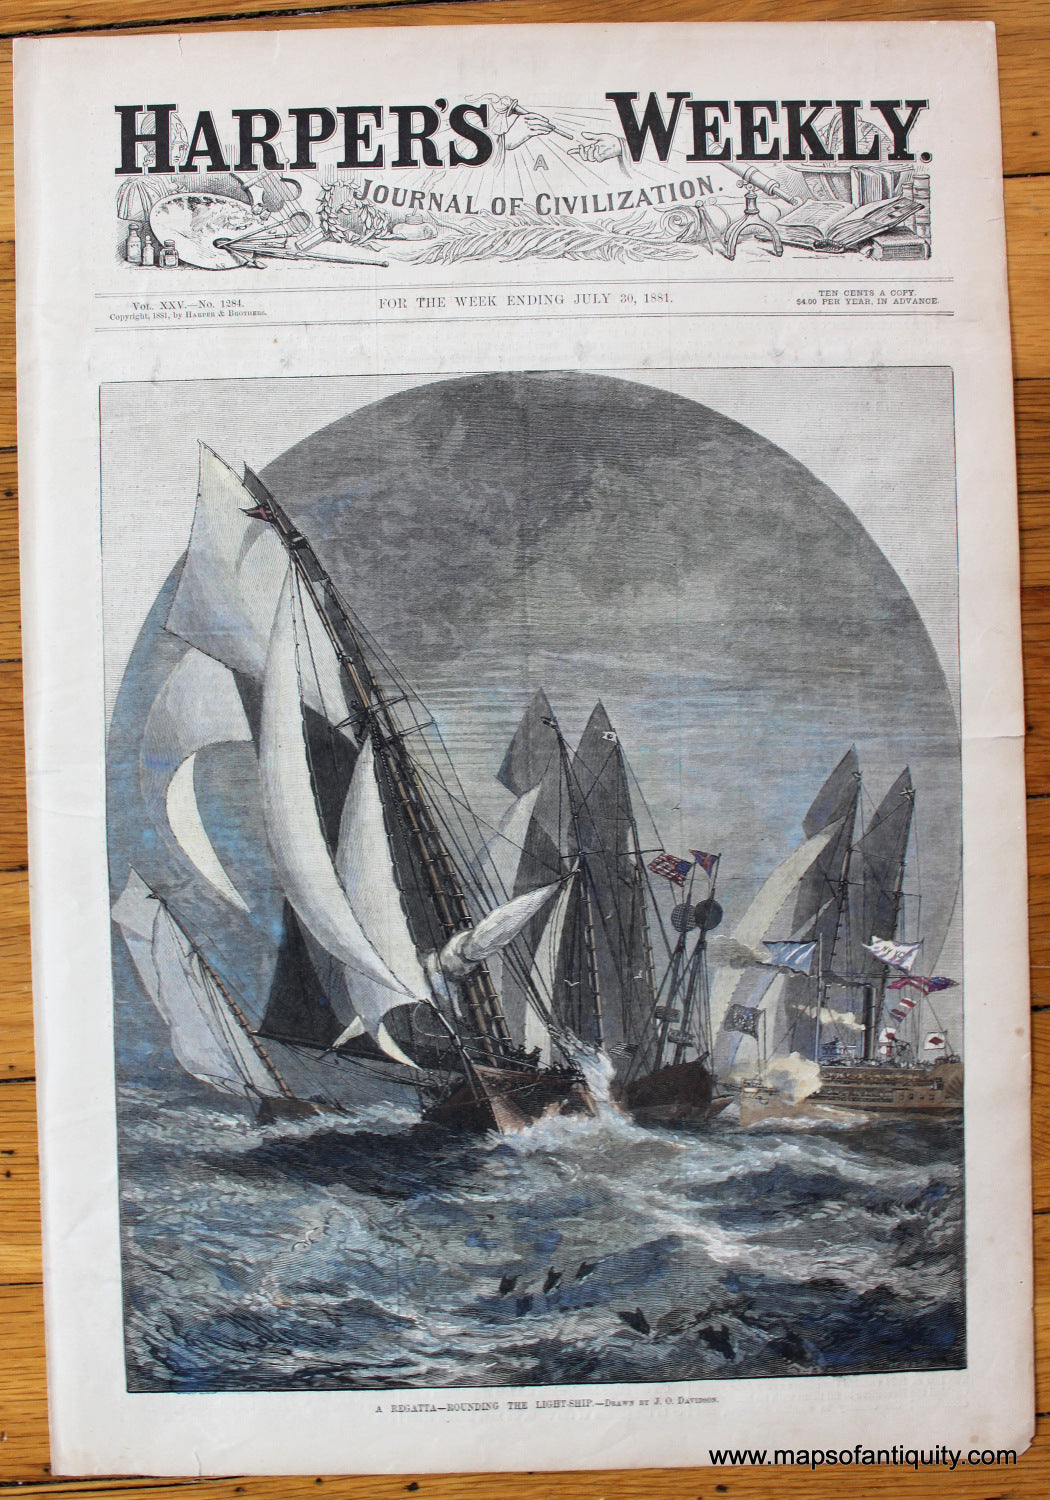 Hand-Colored-Antique-Print-A-Regatta---Rounding-the-Light-Ship-**********-Antique-Prints-Maritime-Prints-1881-Harper's-Weekly-Maps-Of-Antiquity